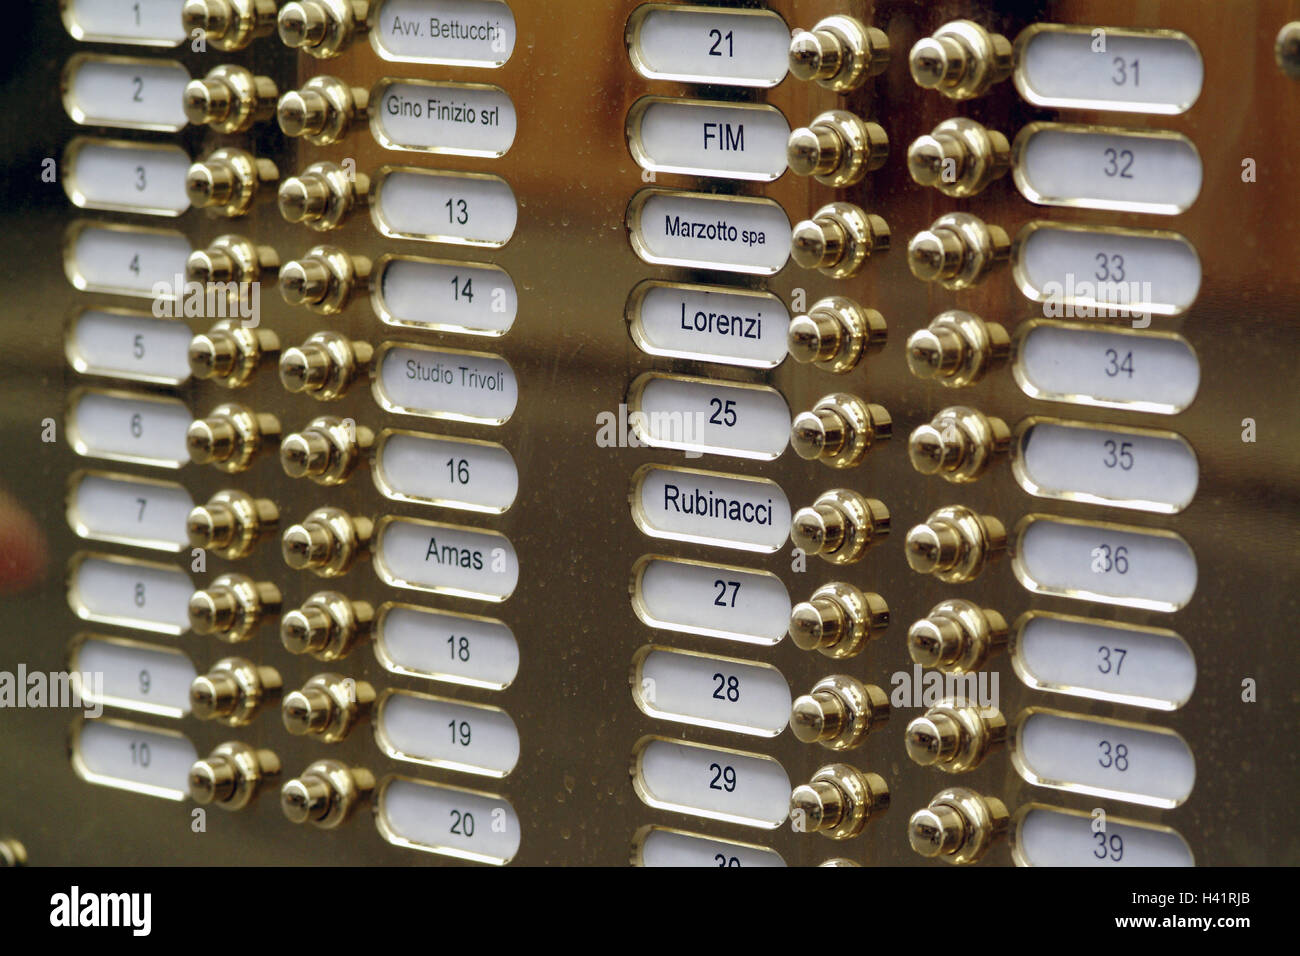 Italy, Milan, block of flats, pinking, detail, Europe, Southern Europe, Repubblica Italiana, region Lombardy, Milano, town, residential house, doorbells, bell signs, names, numbers, inscription, buttons, bell buttons, golden, brass, shine, Still life Stock Photo